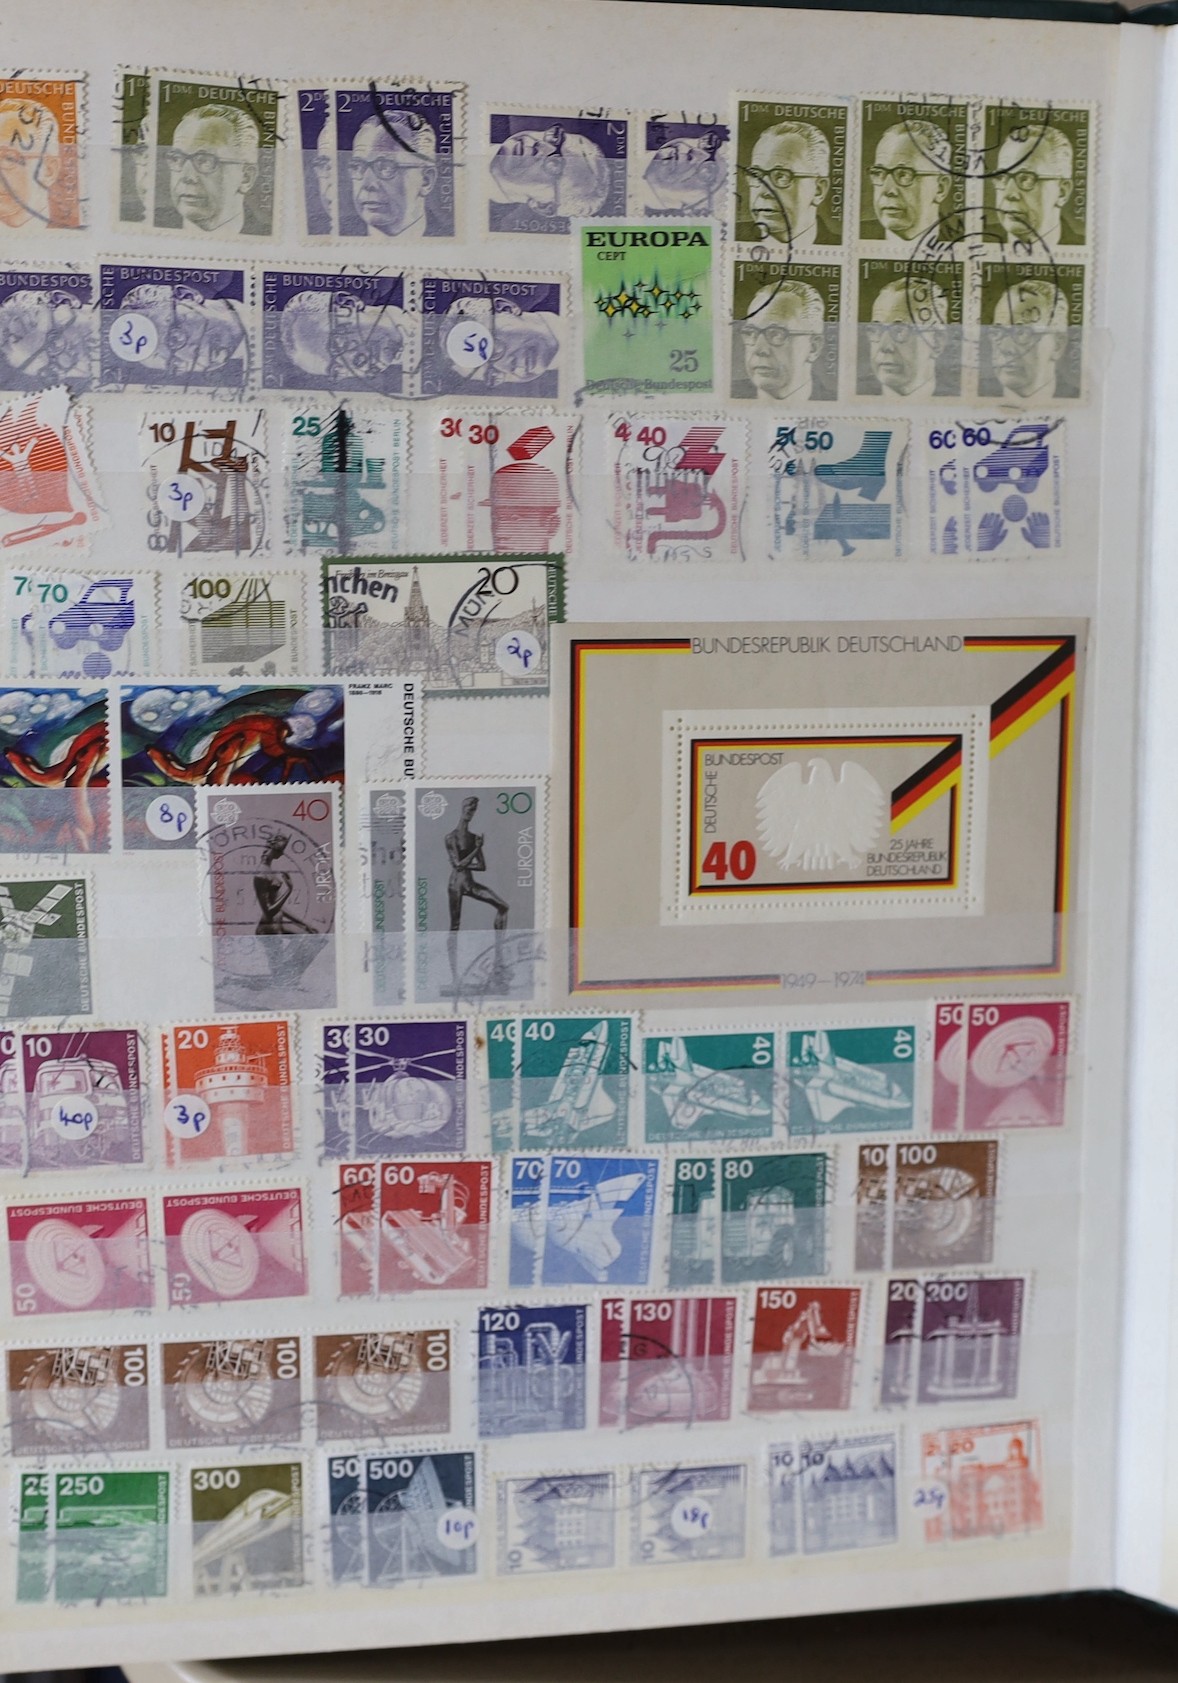 Ten albums World stamps and FDCs, modern airmail covers